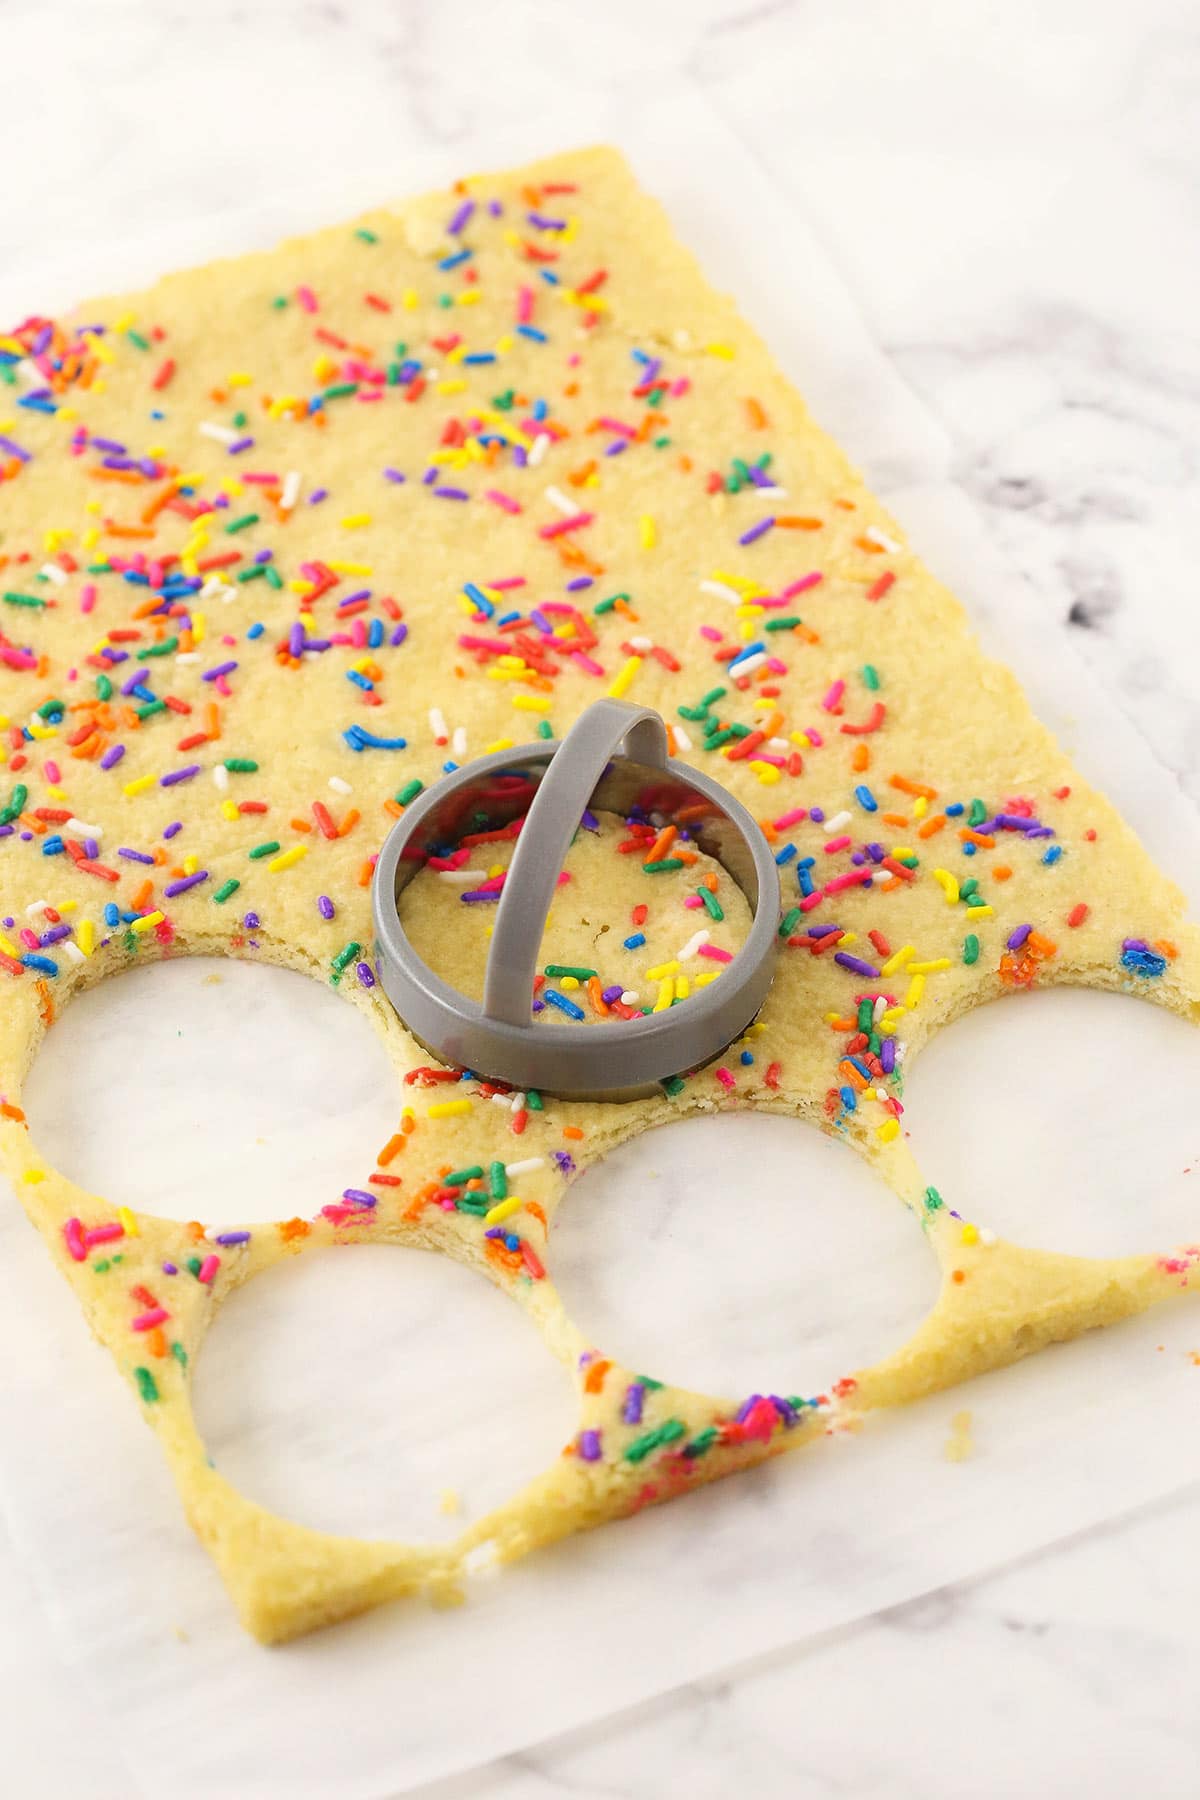 Small circles being cut out of a thin layer of homemade confetti cake